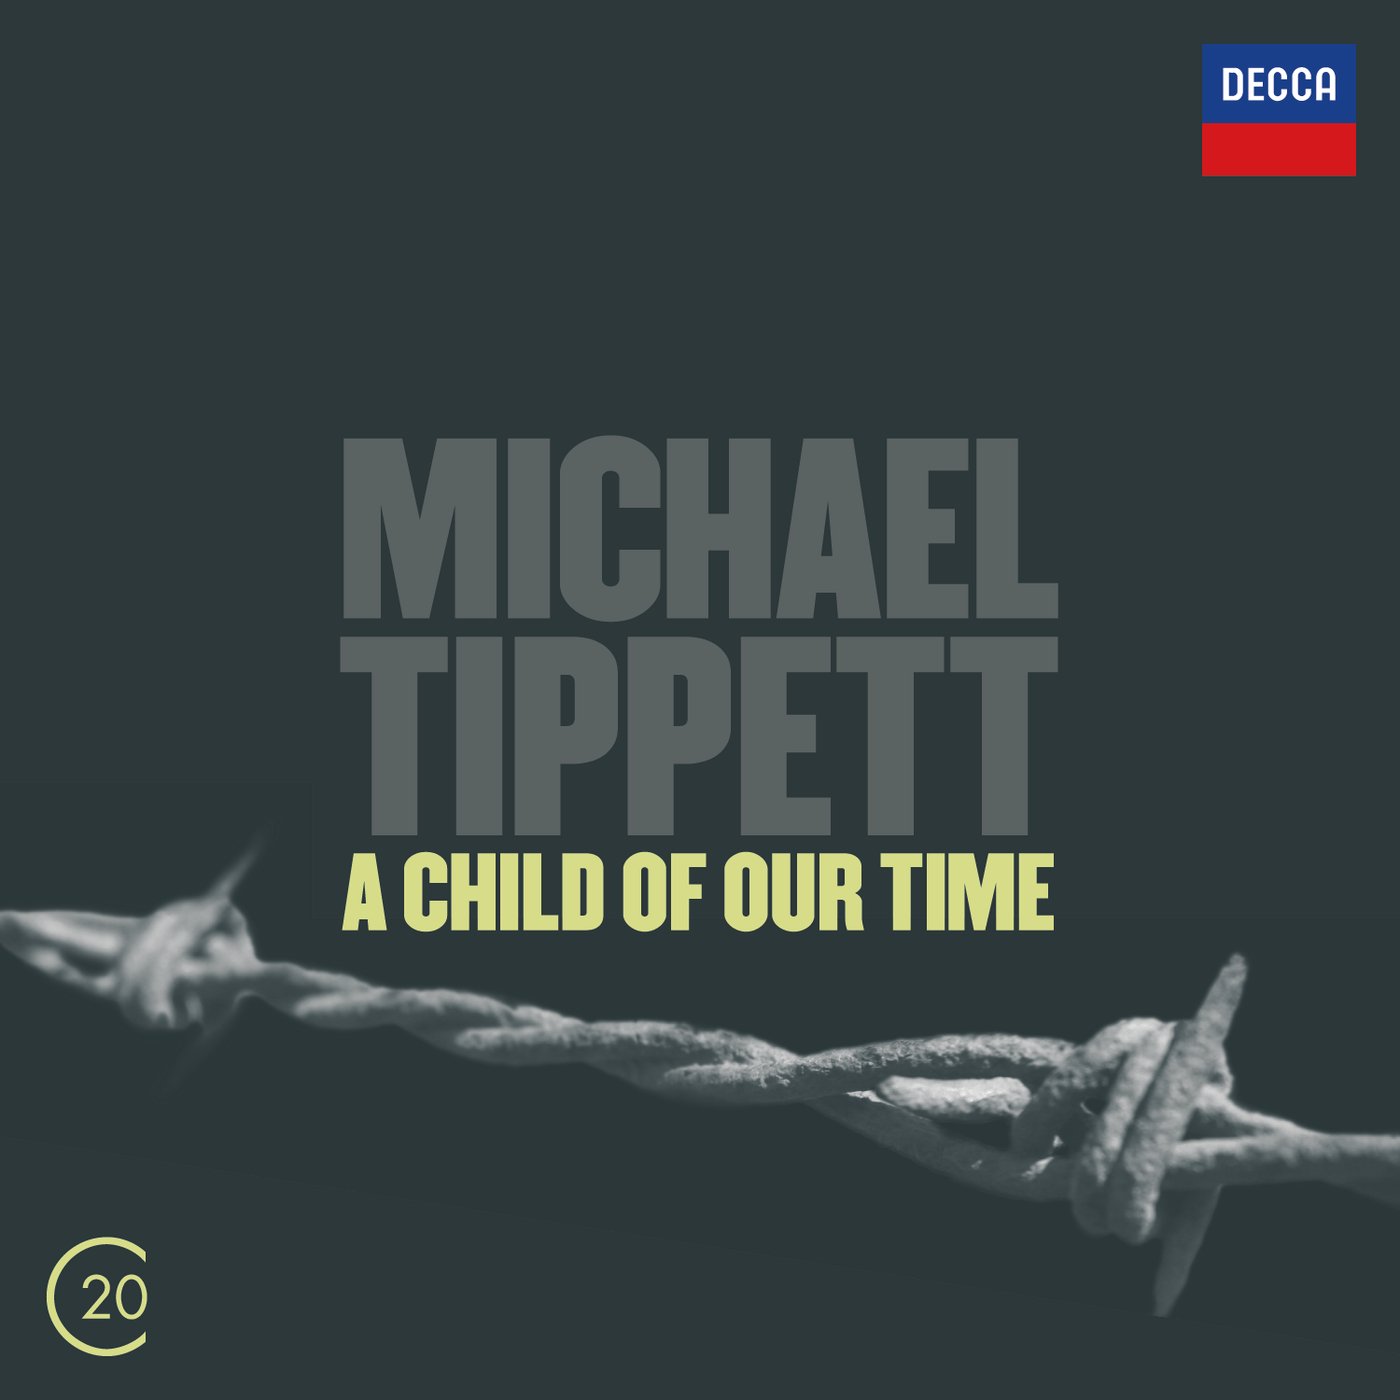 Michael Tippett. A Child Of Our Time